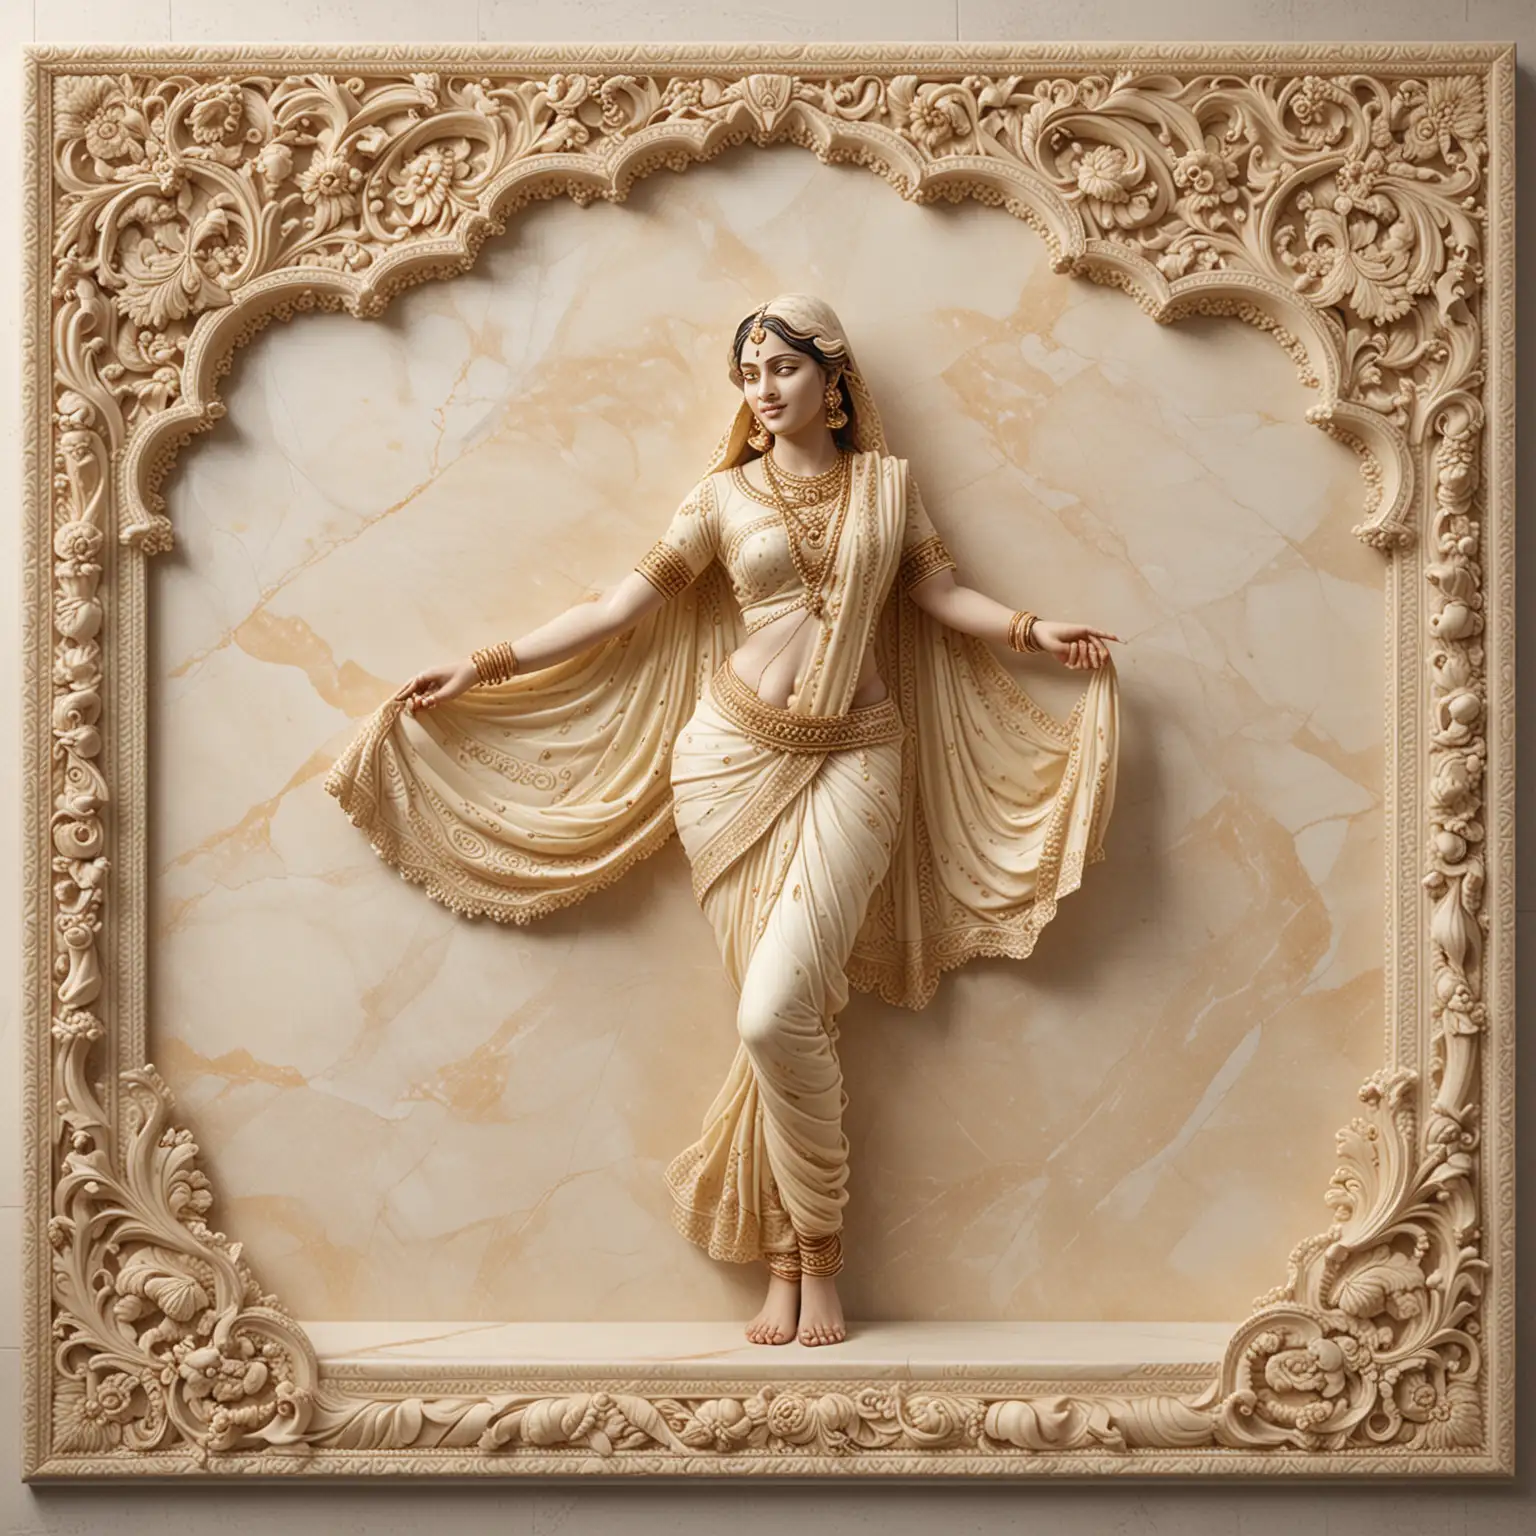 seamless 3d highly detailed and  carved cream marble panel with cream marble ornate frame in the theme of a full length cream marble dancing indian woman in a sari



 





